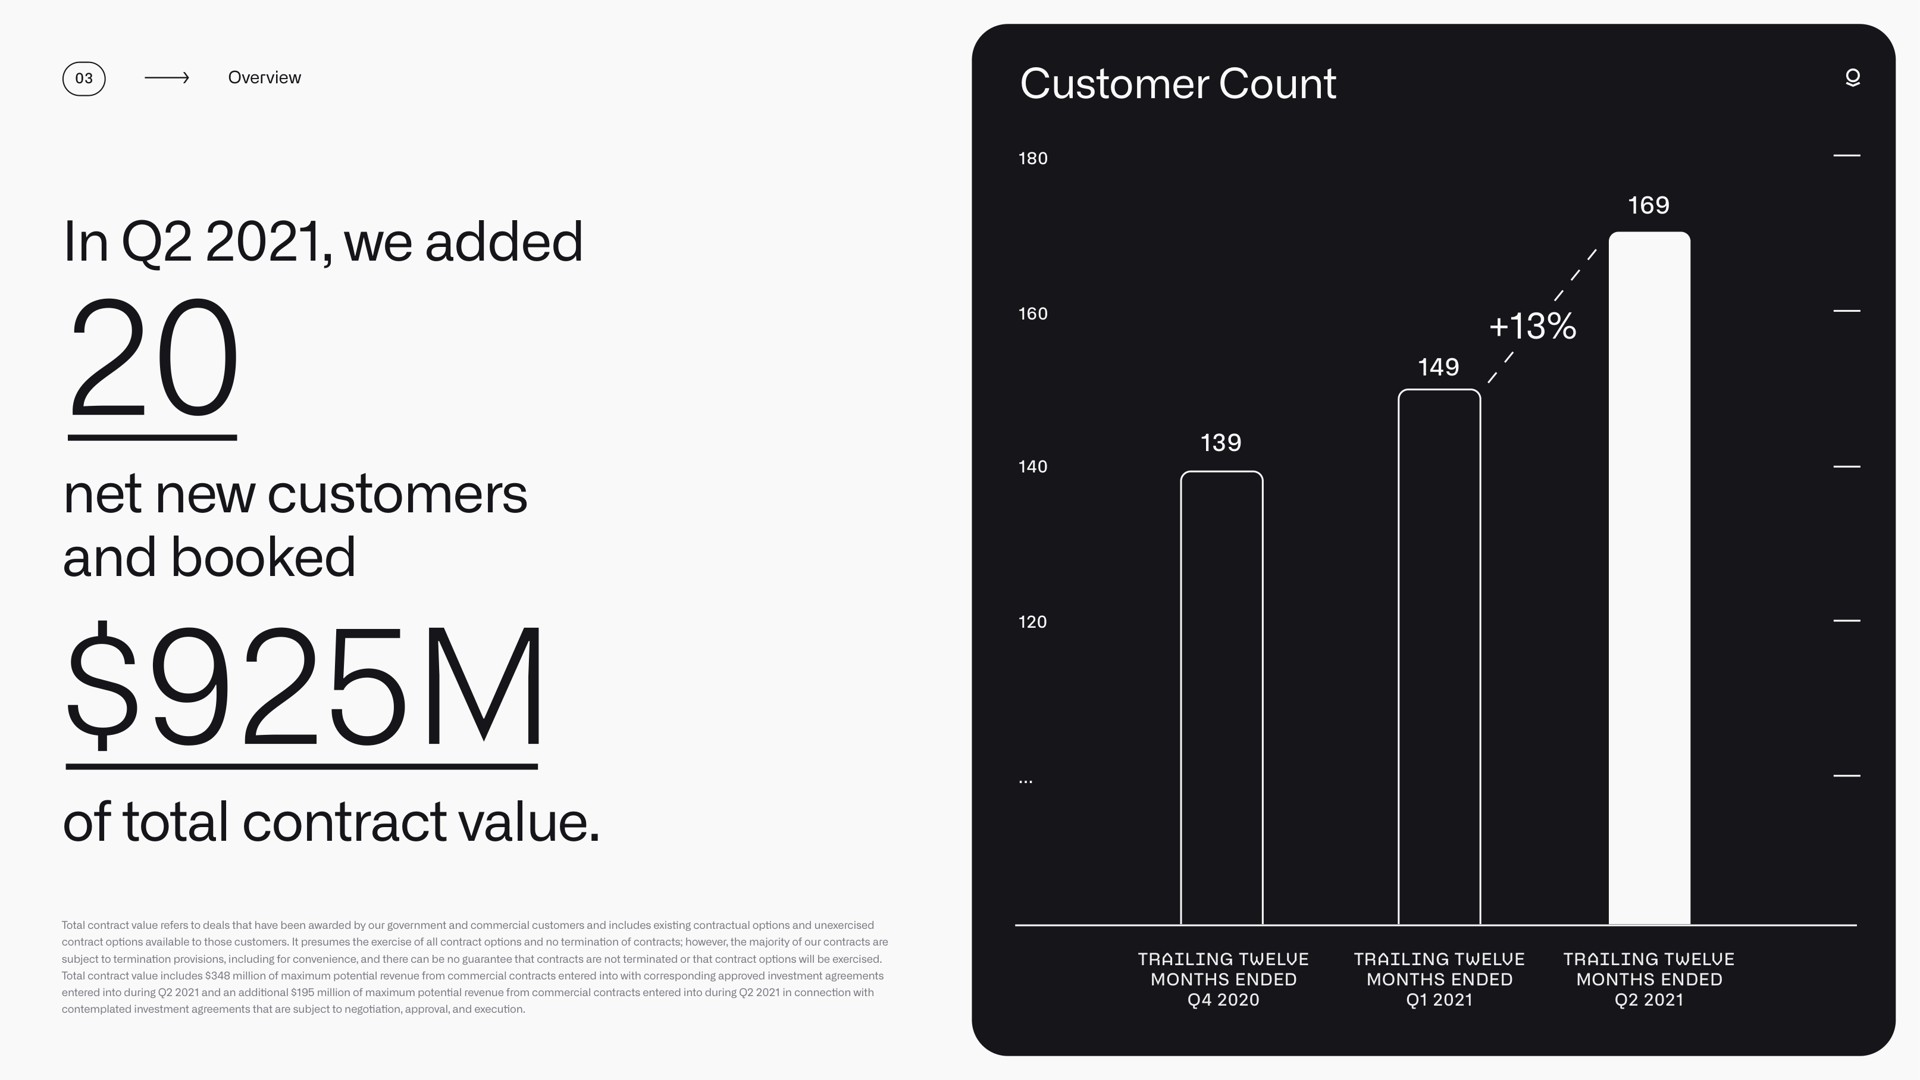 customer count in we added net new customers and booked of total contract value | Palantir